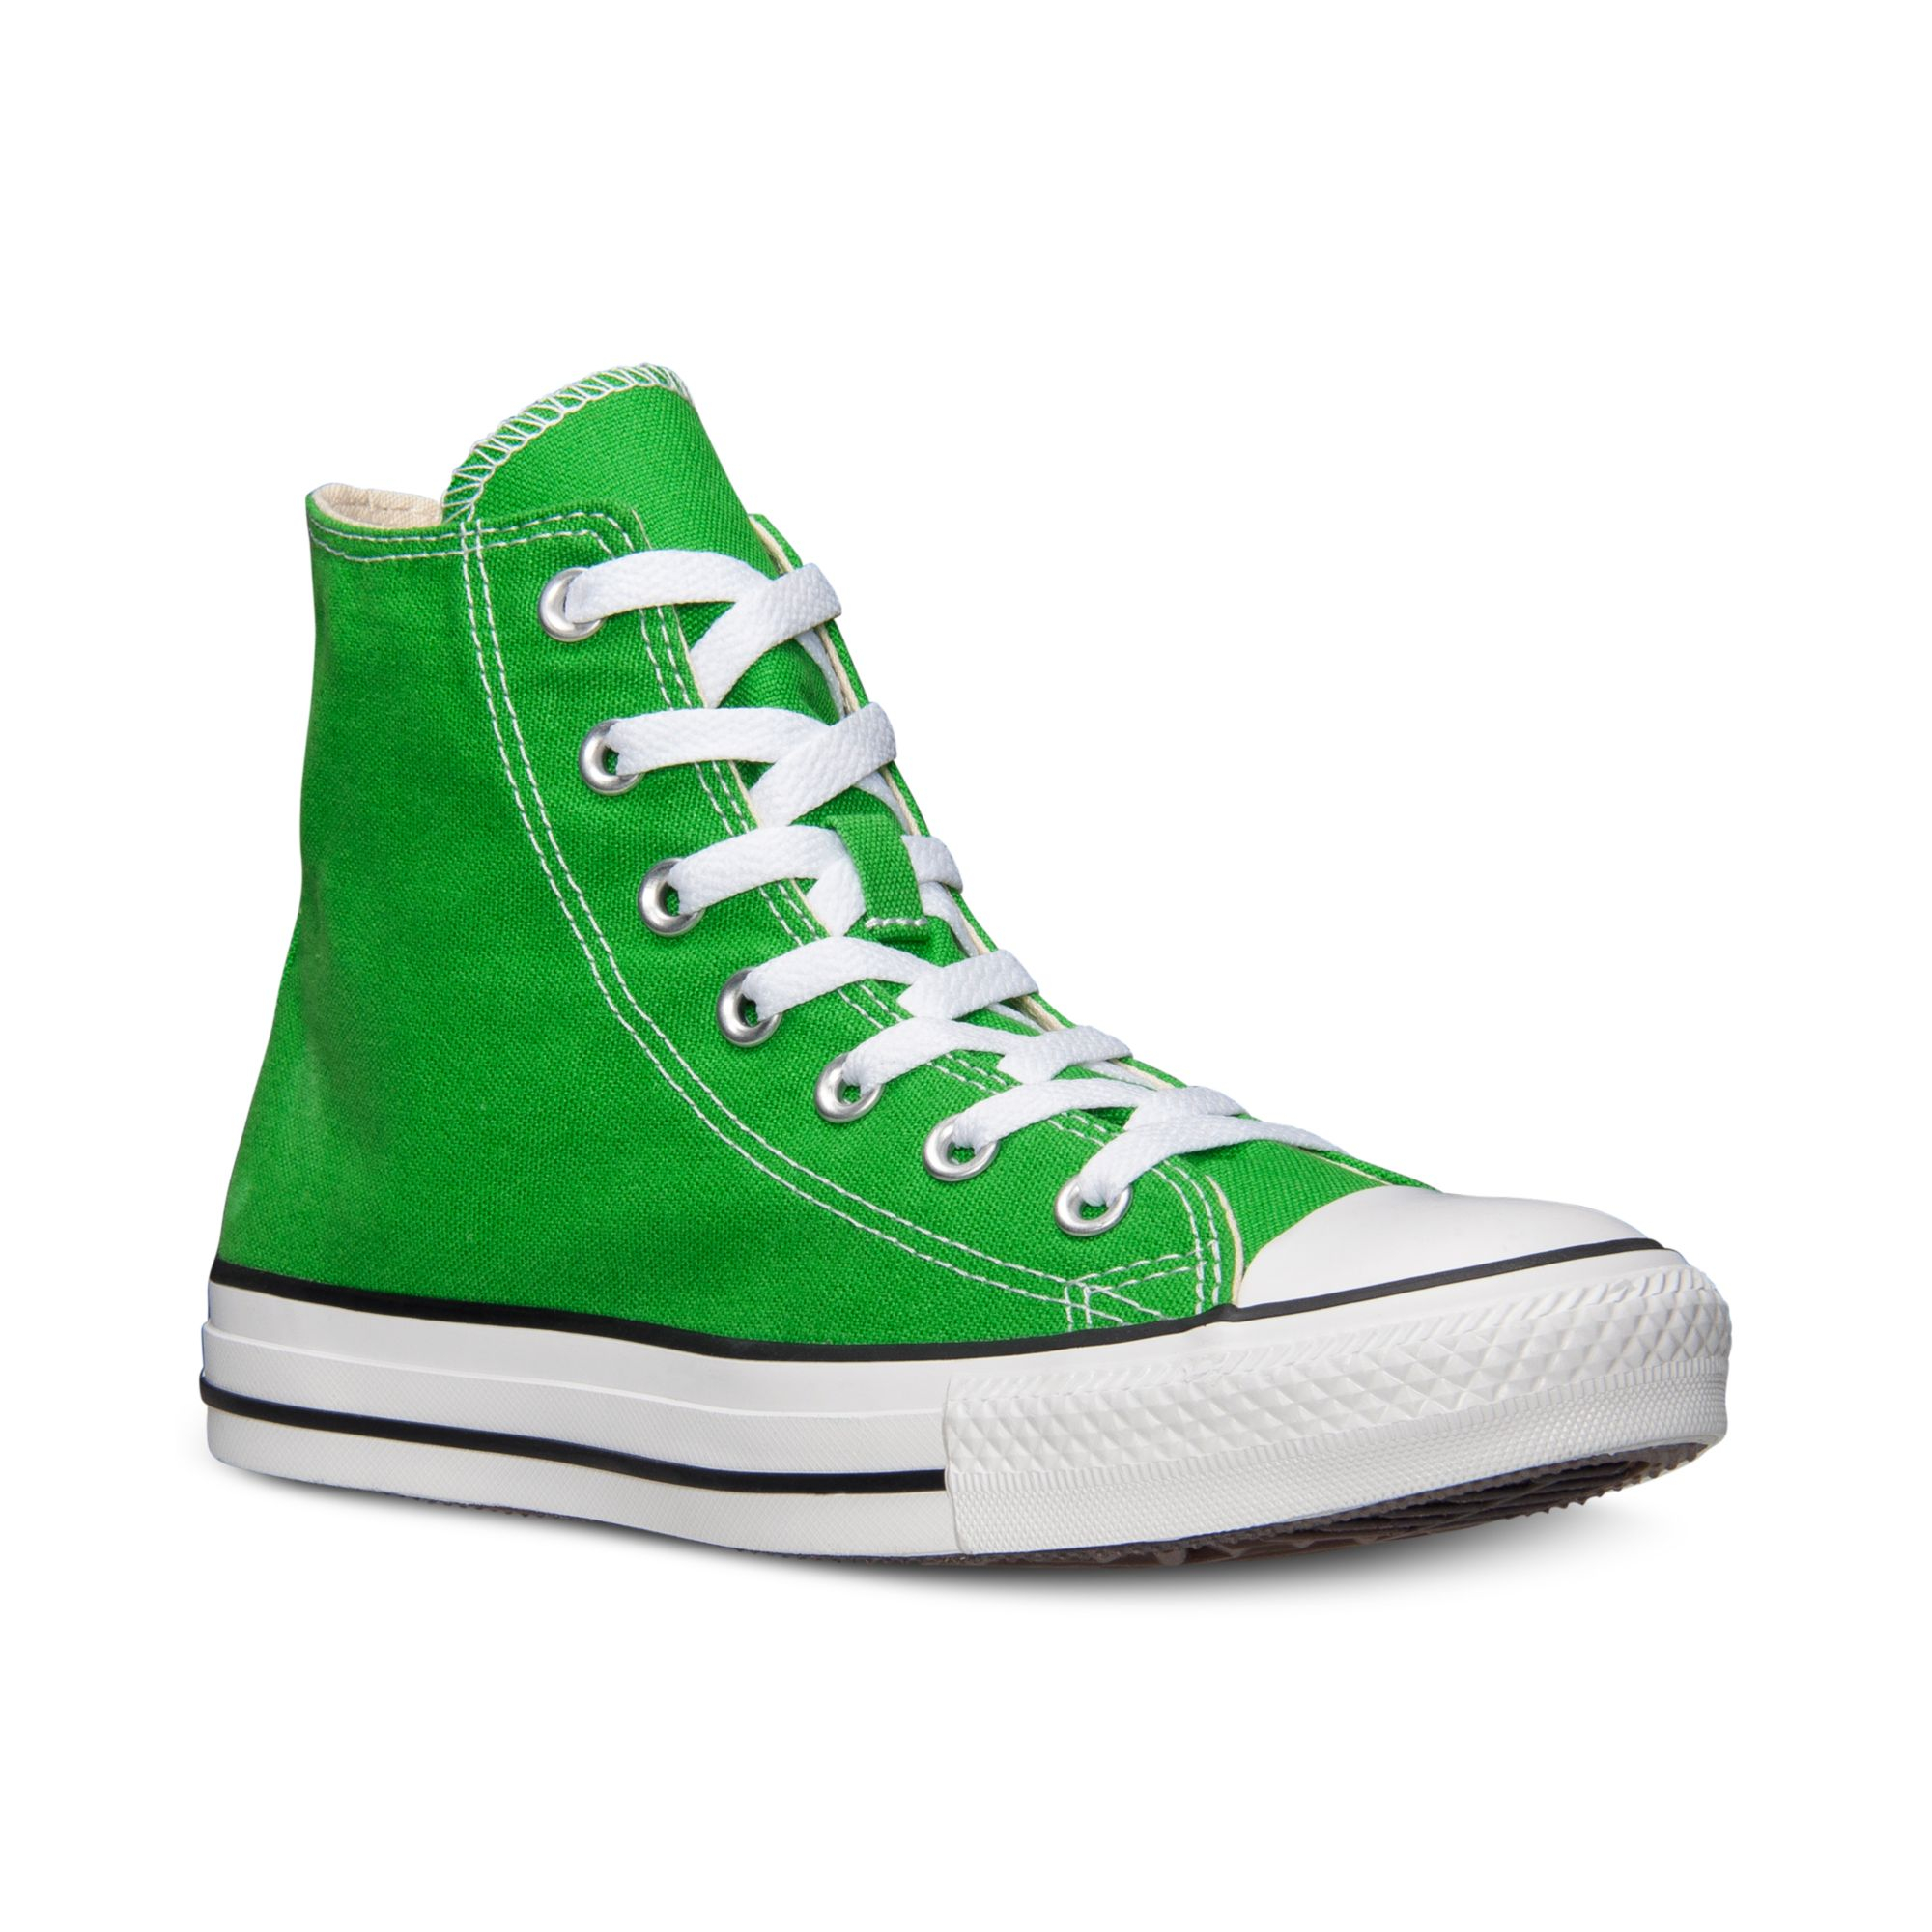 Lyst - Converse Mens Chuck Taylor High Top Casual Sneakers From Finish ...